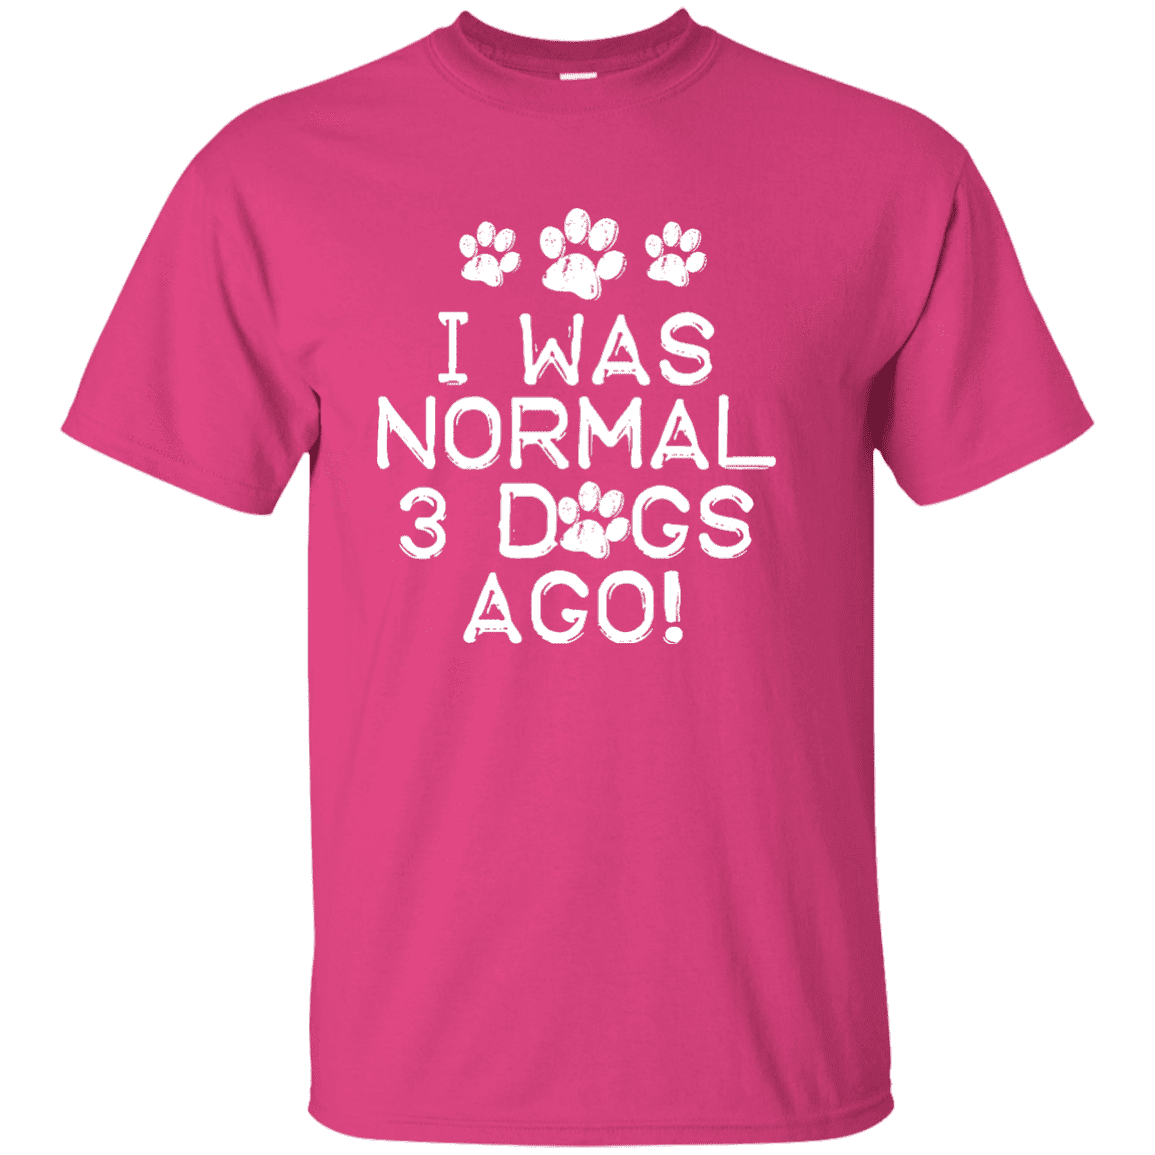 I Was Normal Dogs - T Shirt.